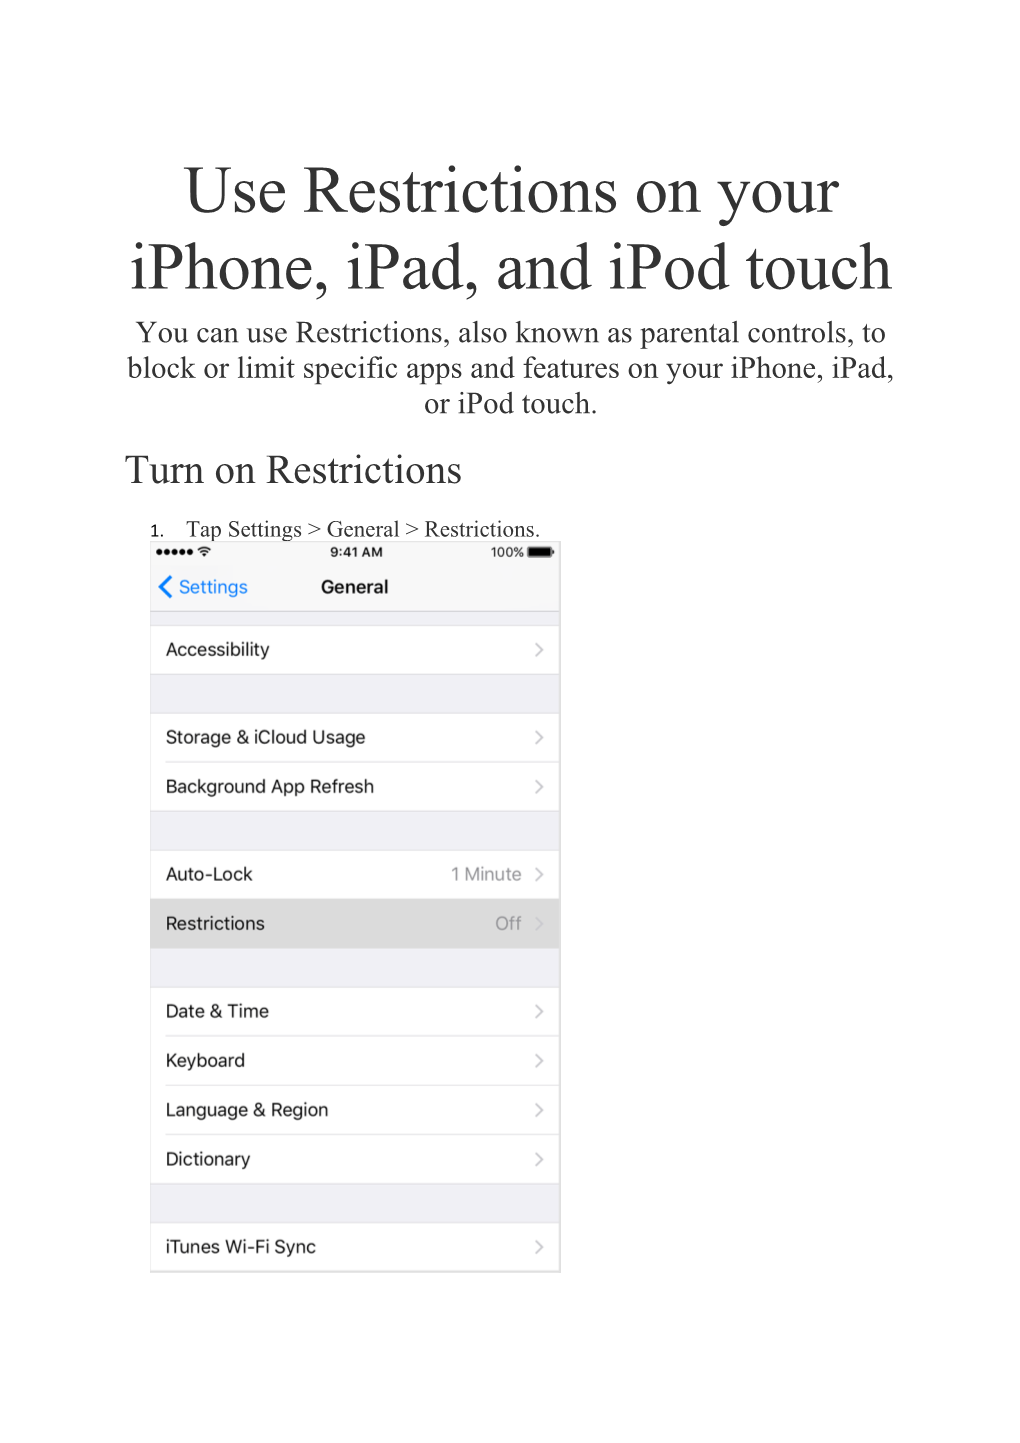 Use Restrictions on Your Iphone, Ipad, and Ipod Touch